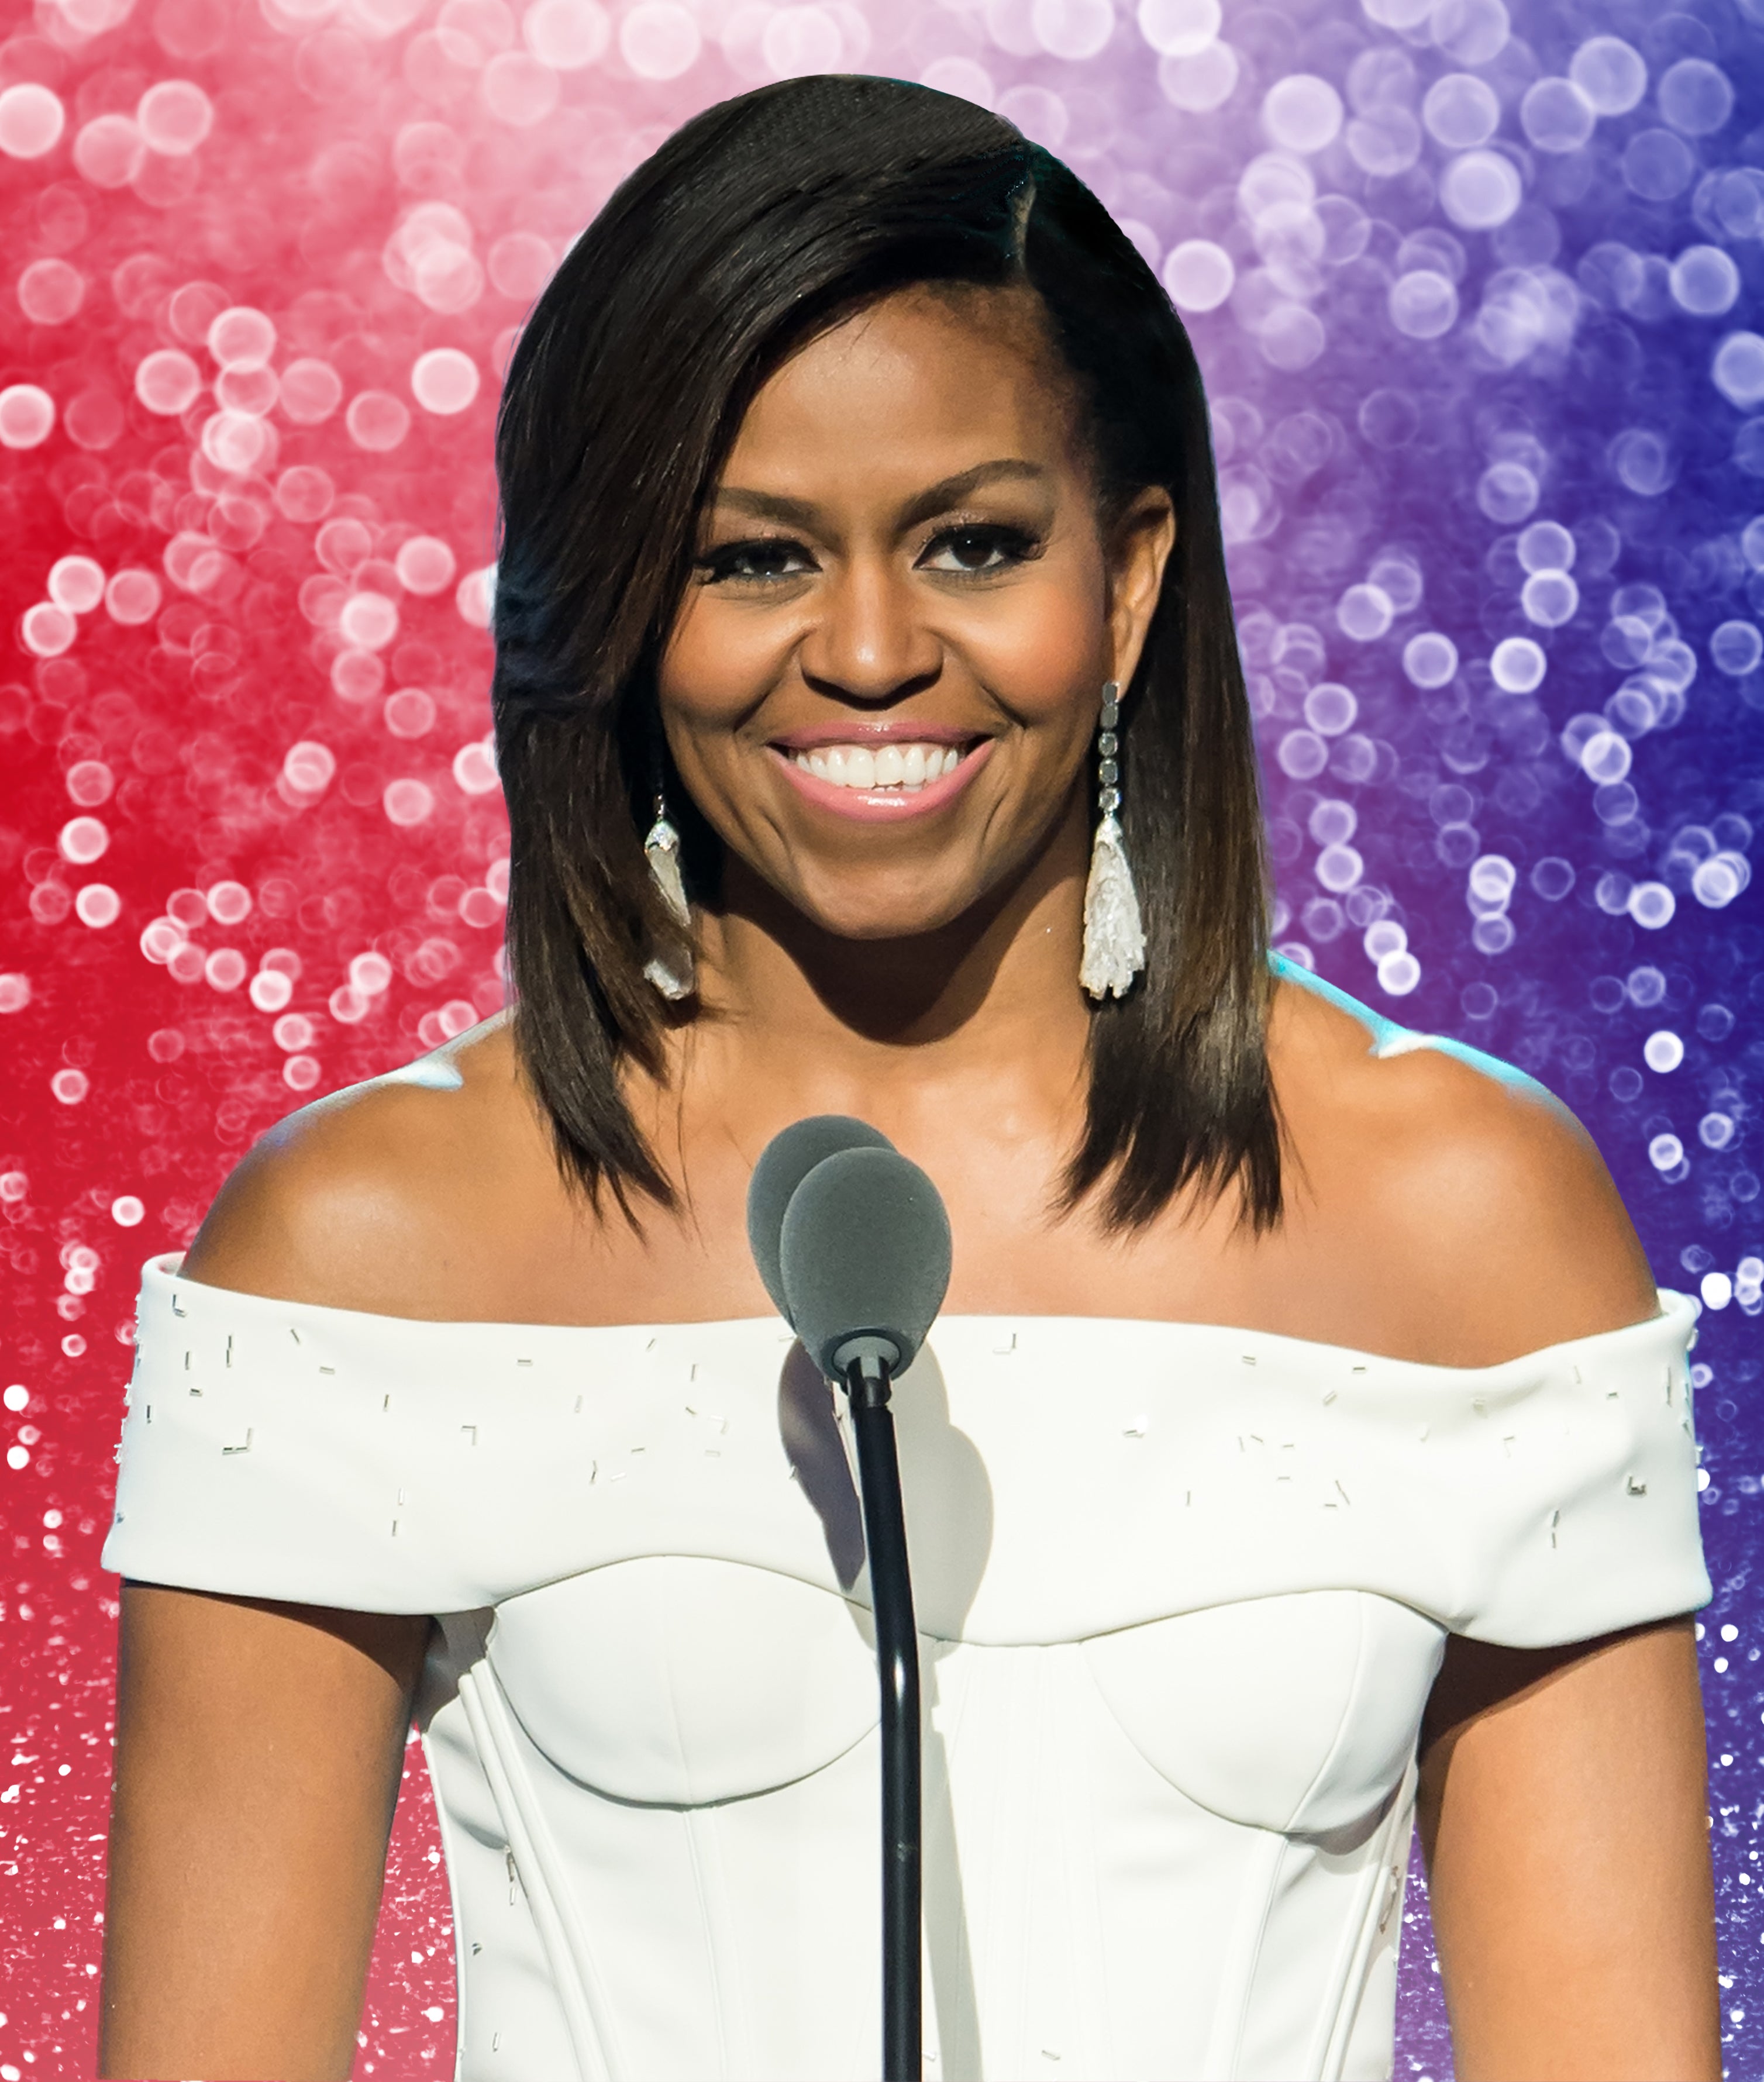 10 Michelle Obama Quotes That Made Us Proud To Be Black Women
